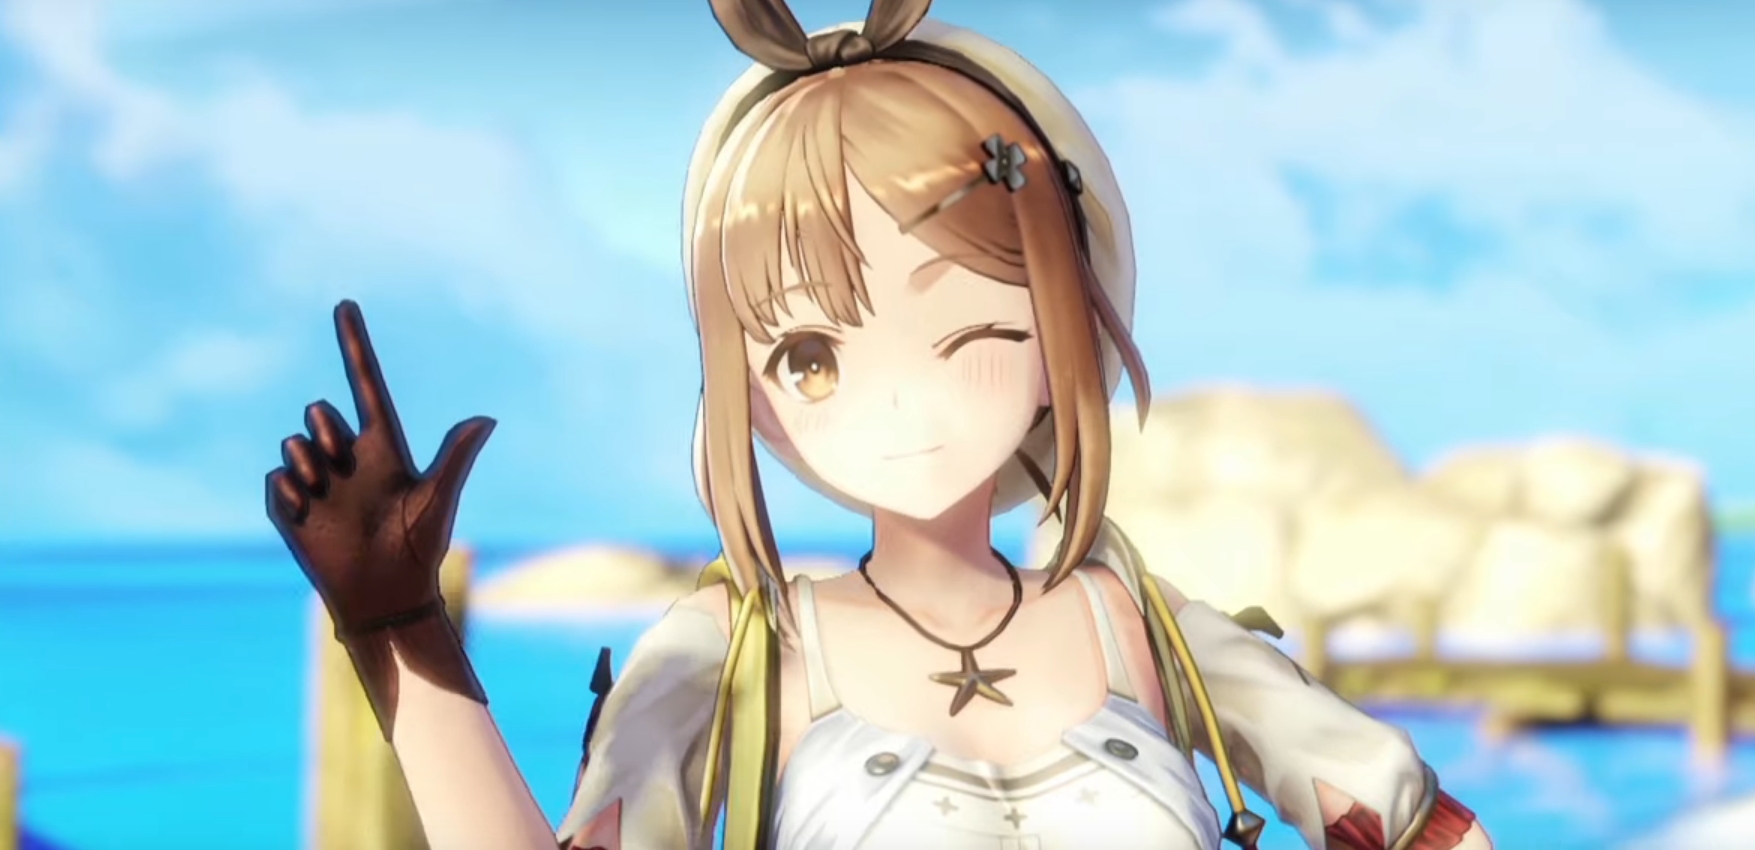 Koei Tecmo Announces Restock For Atelier Ryza: Ever Darkness And The Secret Hideout On Switch